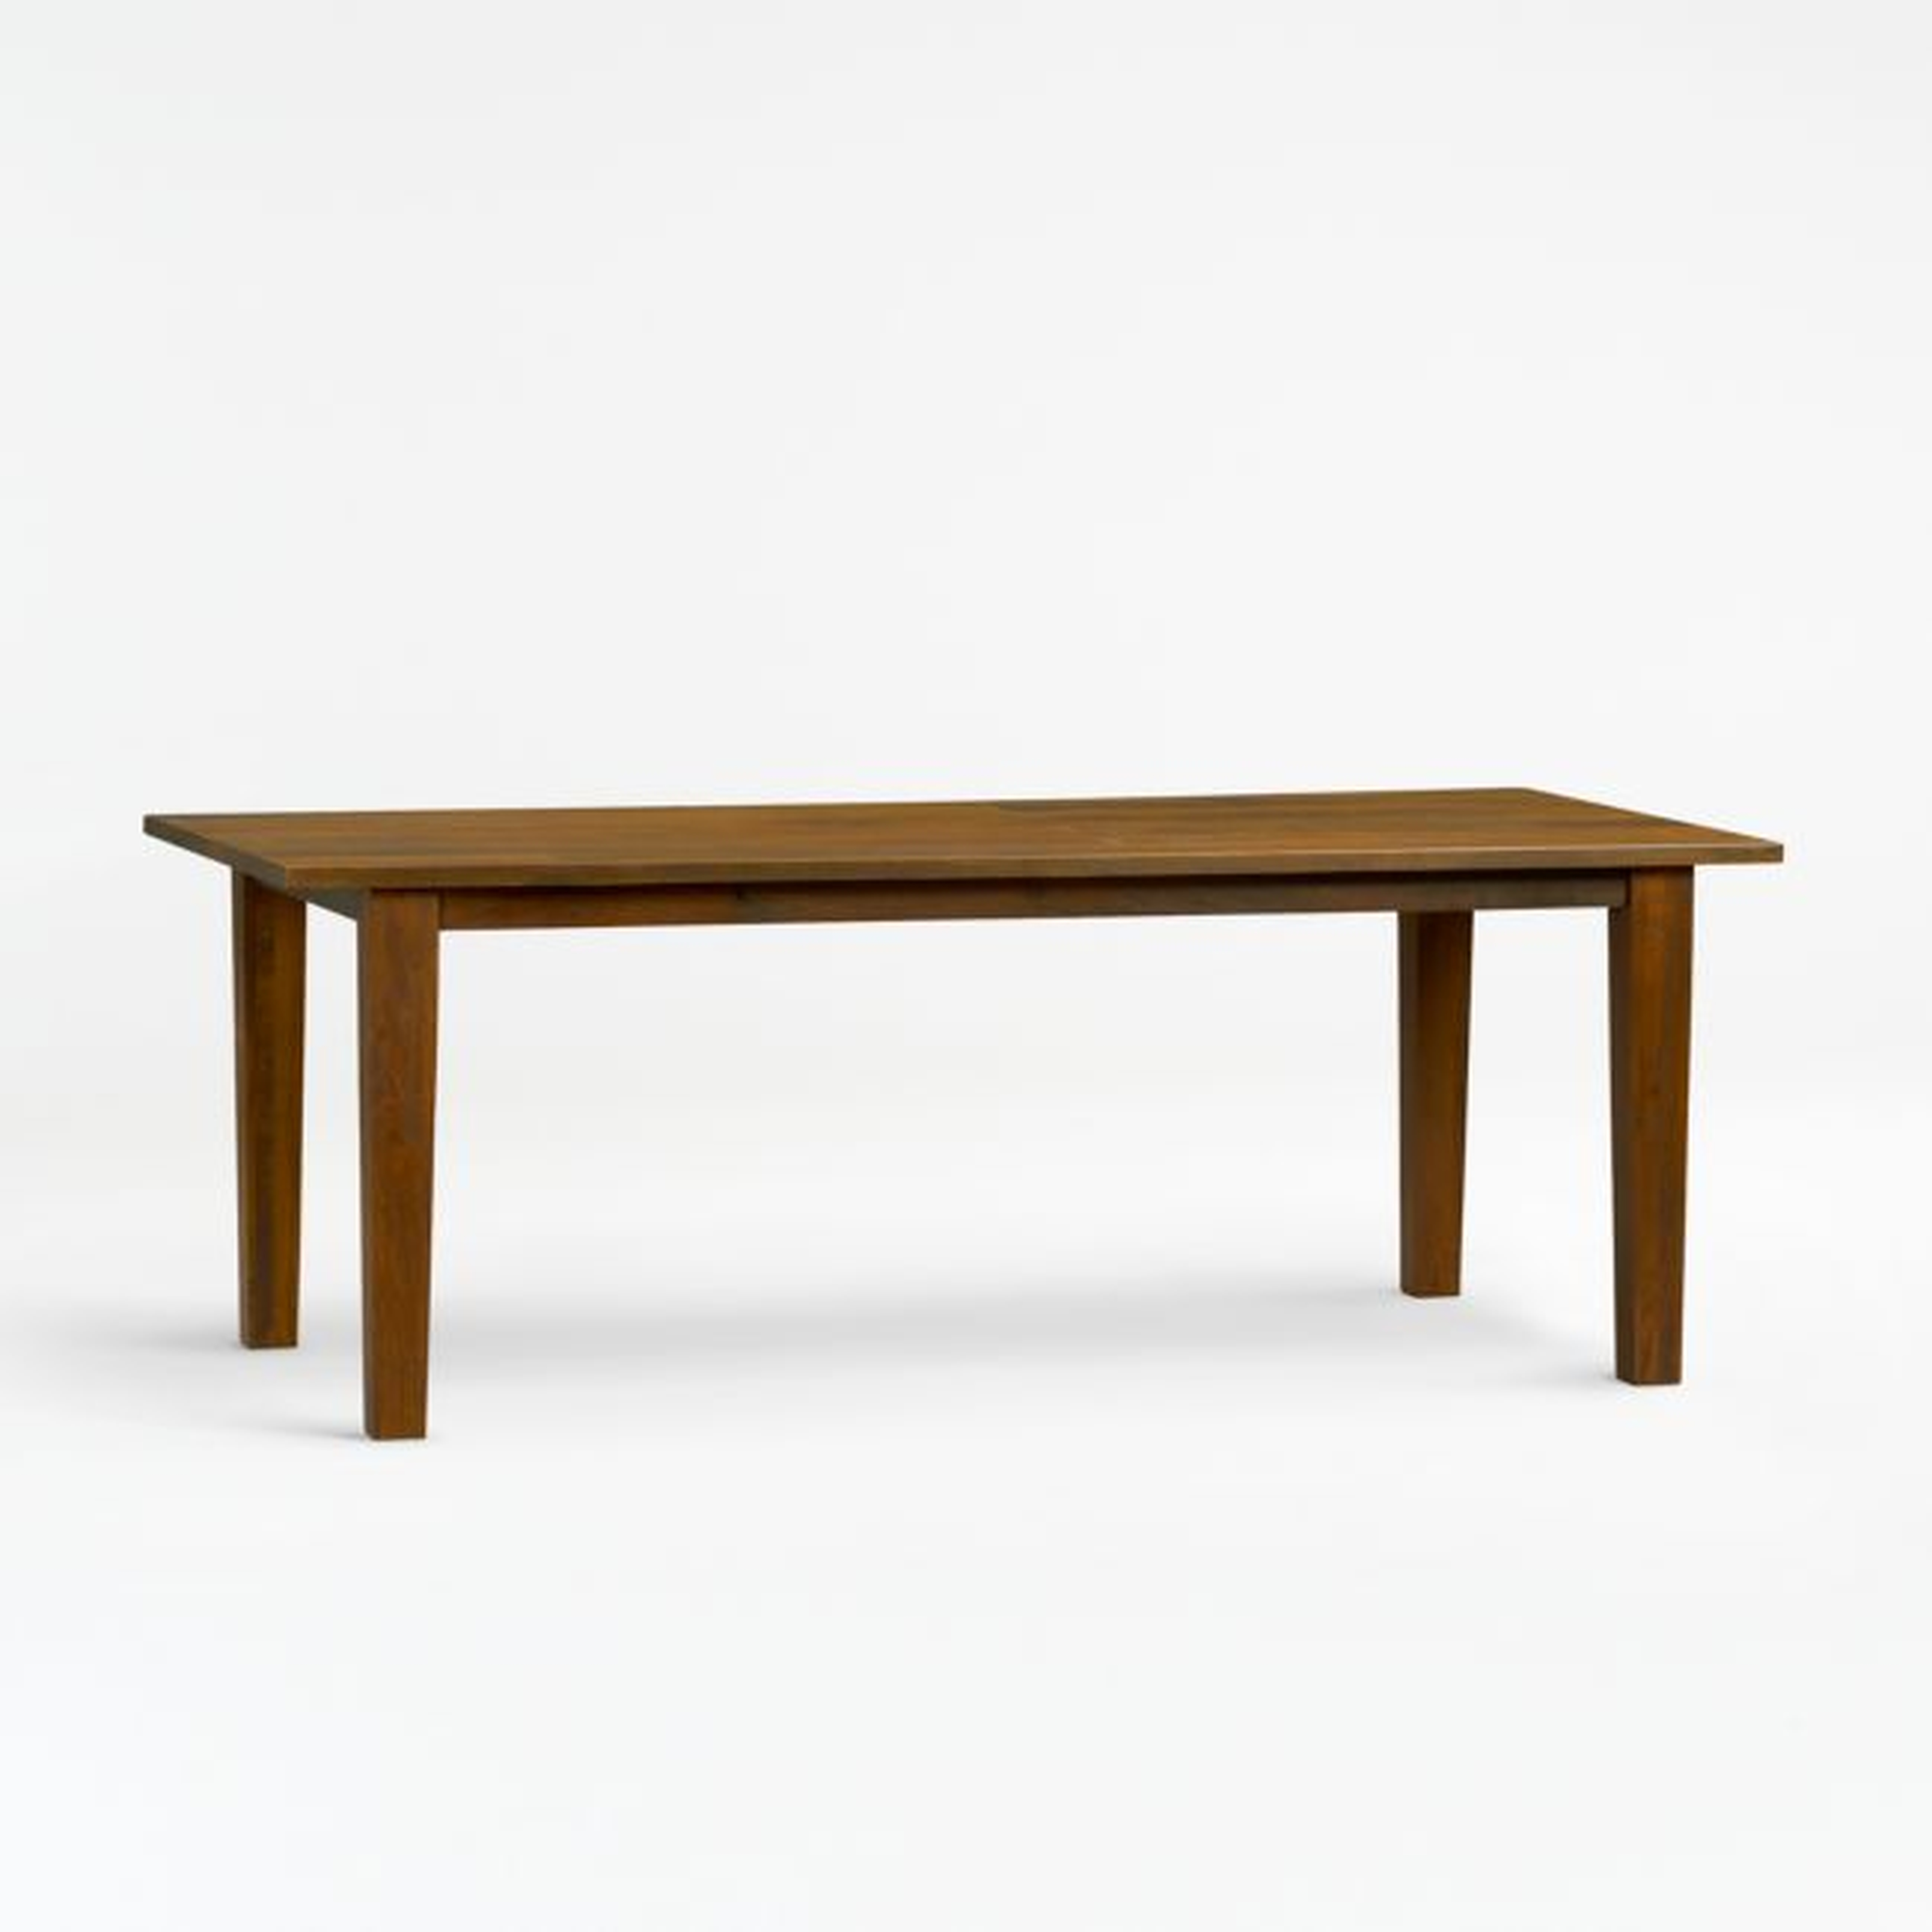 Basque 82" Honey Brown Solid Wood Dining Table - Crate and Barrel